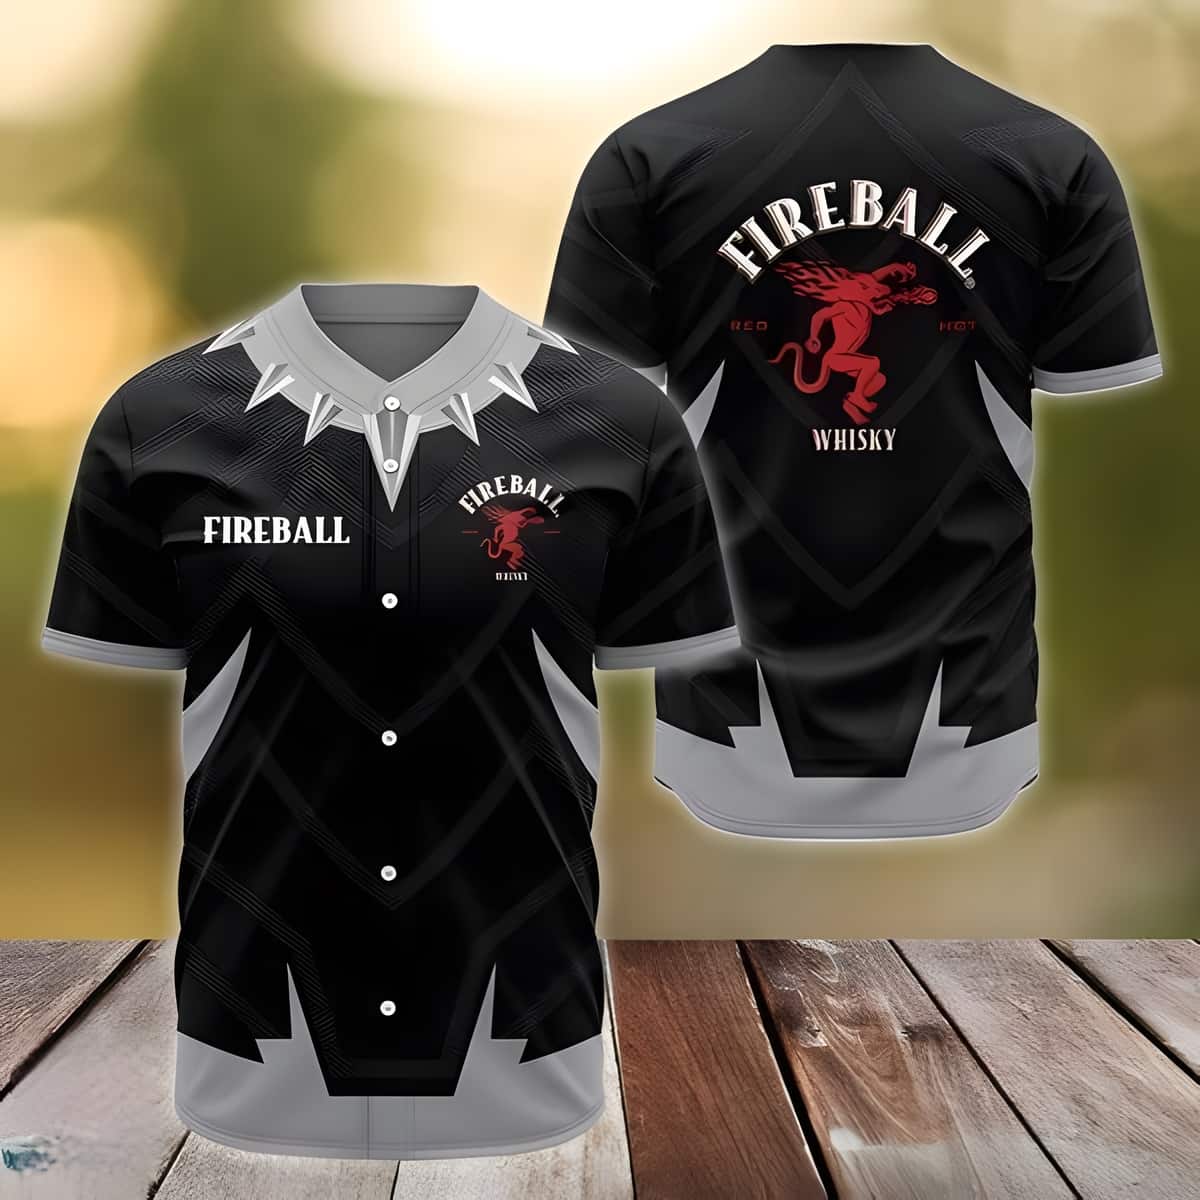 Fireball Baseball Jersey Black Panther Gift For Whisky Lovers